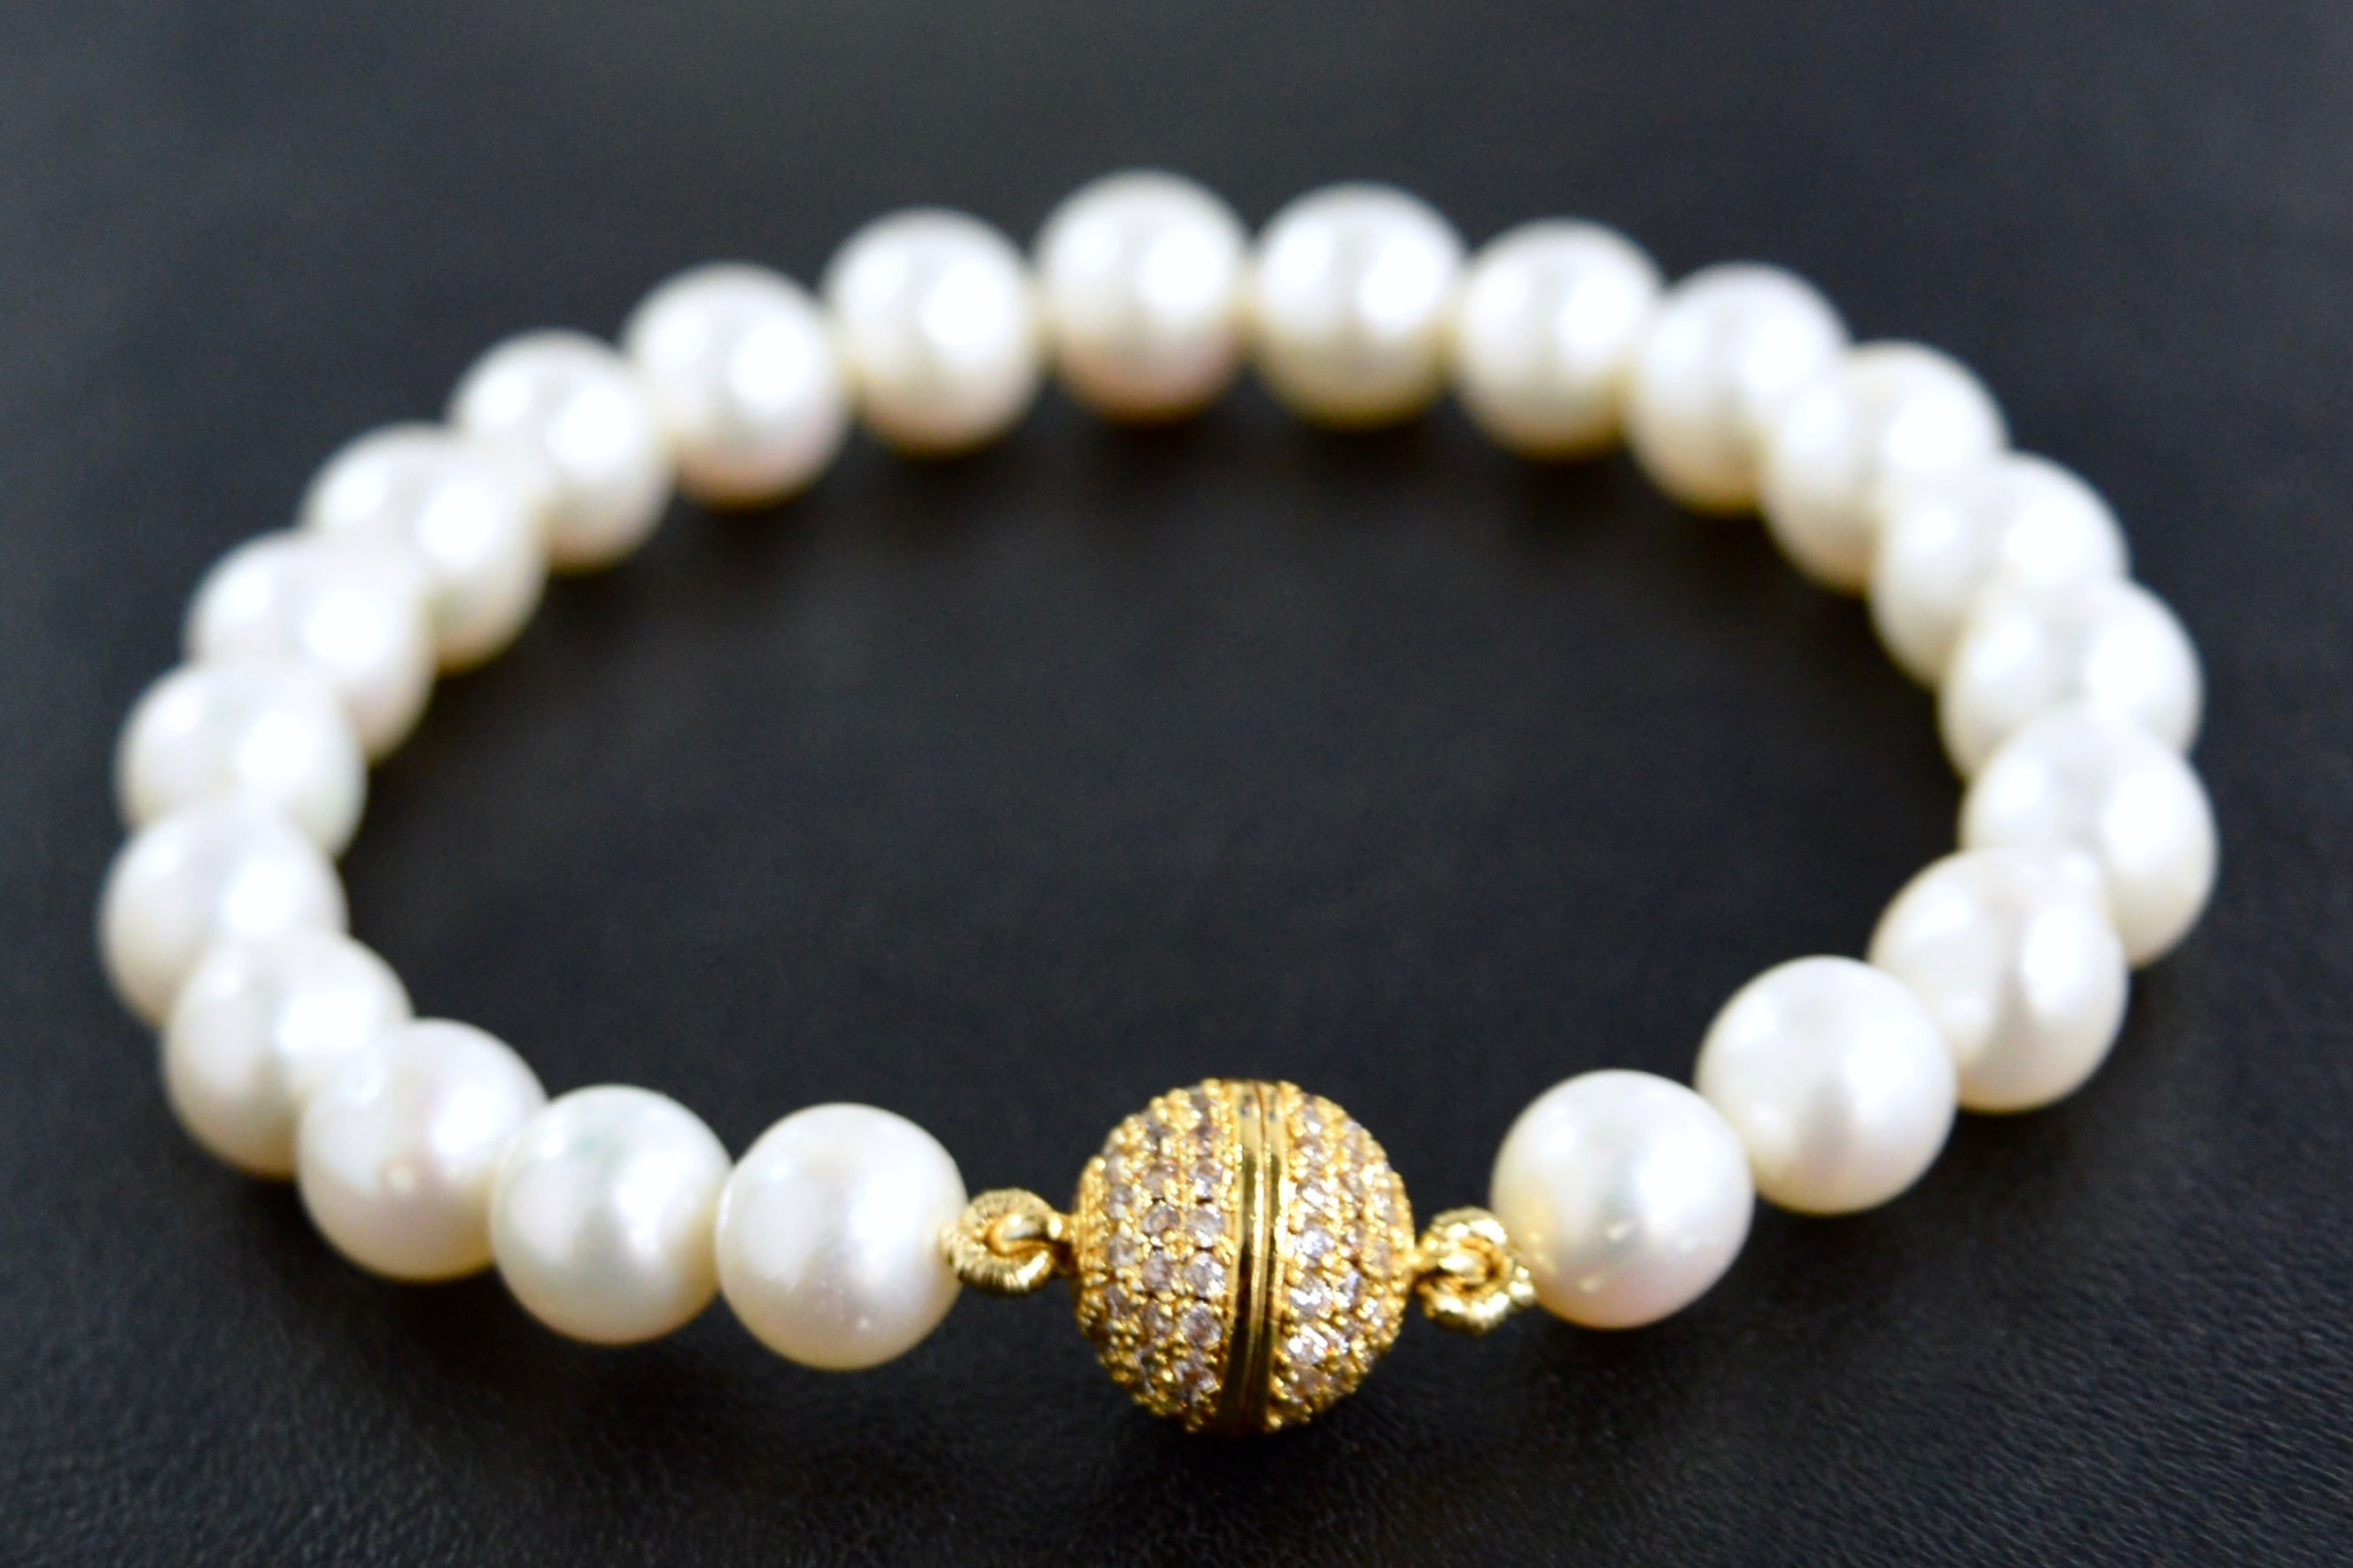 Mallorca Pearl - Basic Life Collection - Simple Bracelet